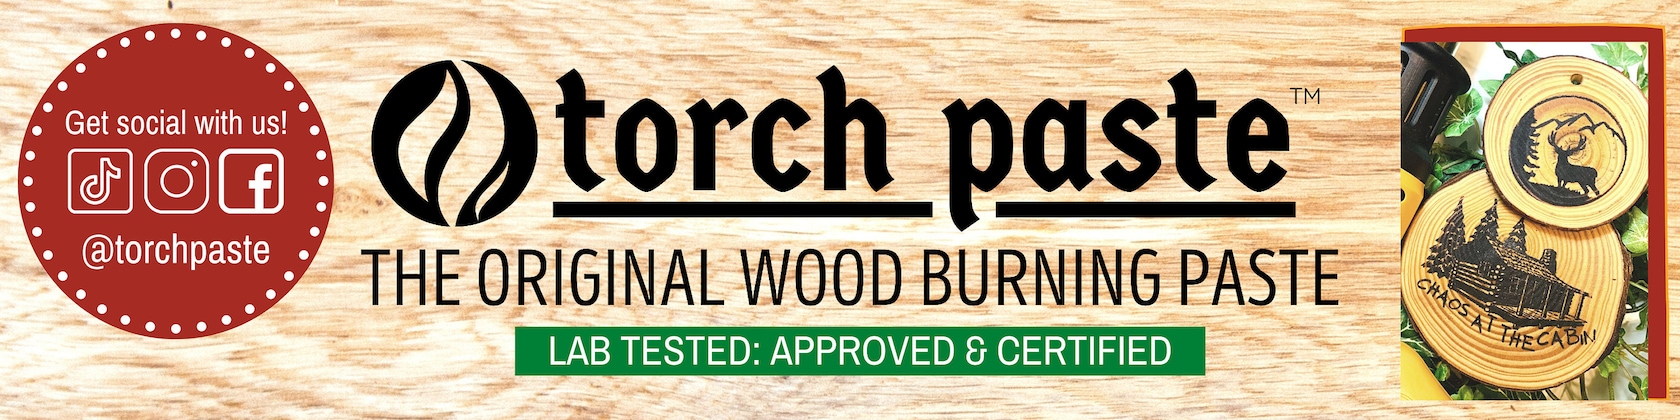 Torch Paste - The Original Wood Burning Paste, Made in USA